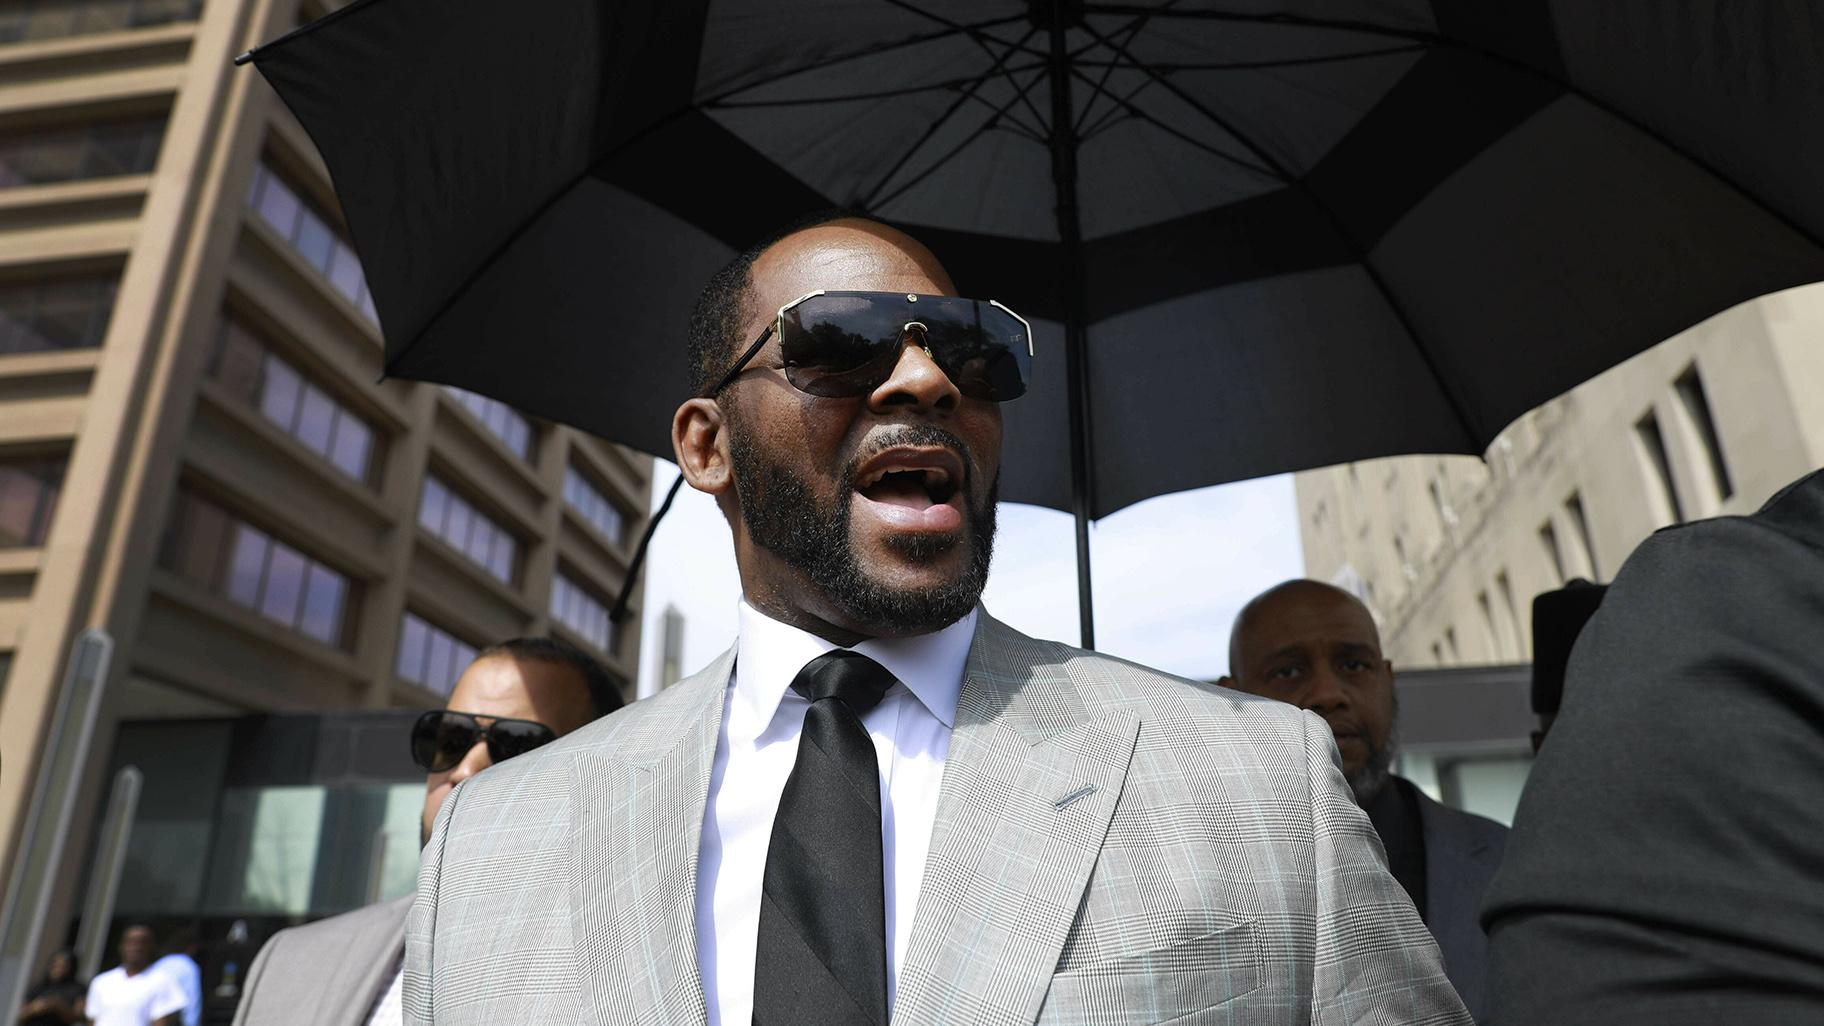 In this June 6, 2019 file photo, musician R. Kelly departs the Leighton Criminal Court building after pleading not guilty to 11 additional sex-related charges in Chicago. (AP Photo / Amr Alfiky, File)